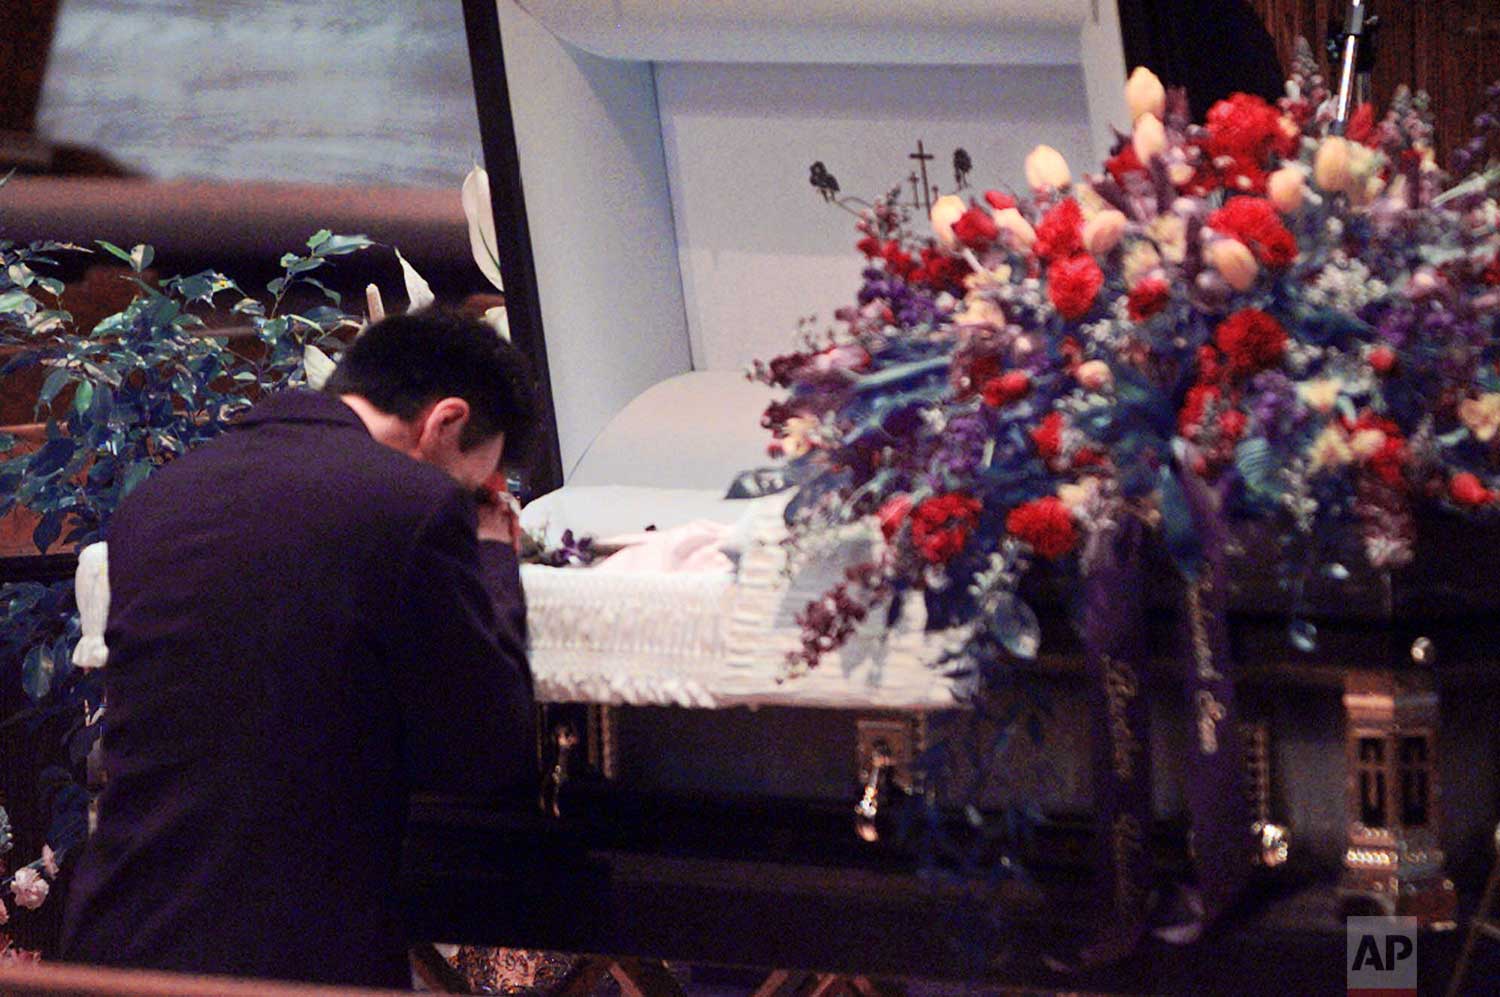  An unidentified mourner pauses to pray in front of the casket of Kyle Velasquez during funeral services in Littleton, Colo., Tuesday, April 27, 1999. Velasquez was killed during a shooting rampage at Columbine High School. (AP Photo/Laura Rauch) 